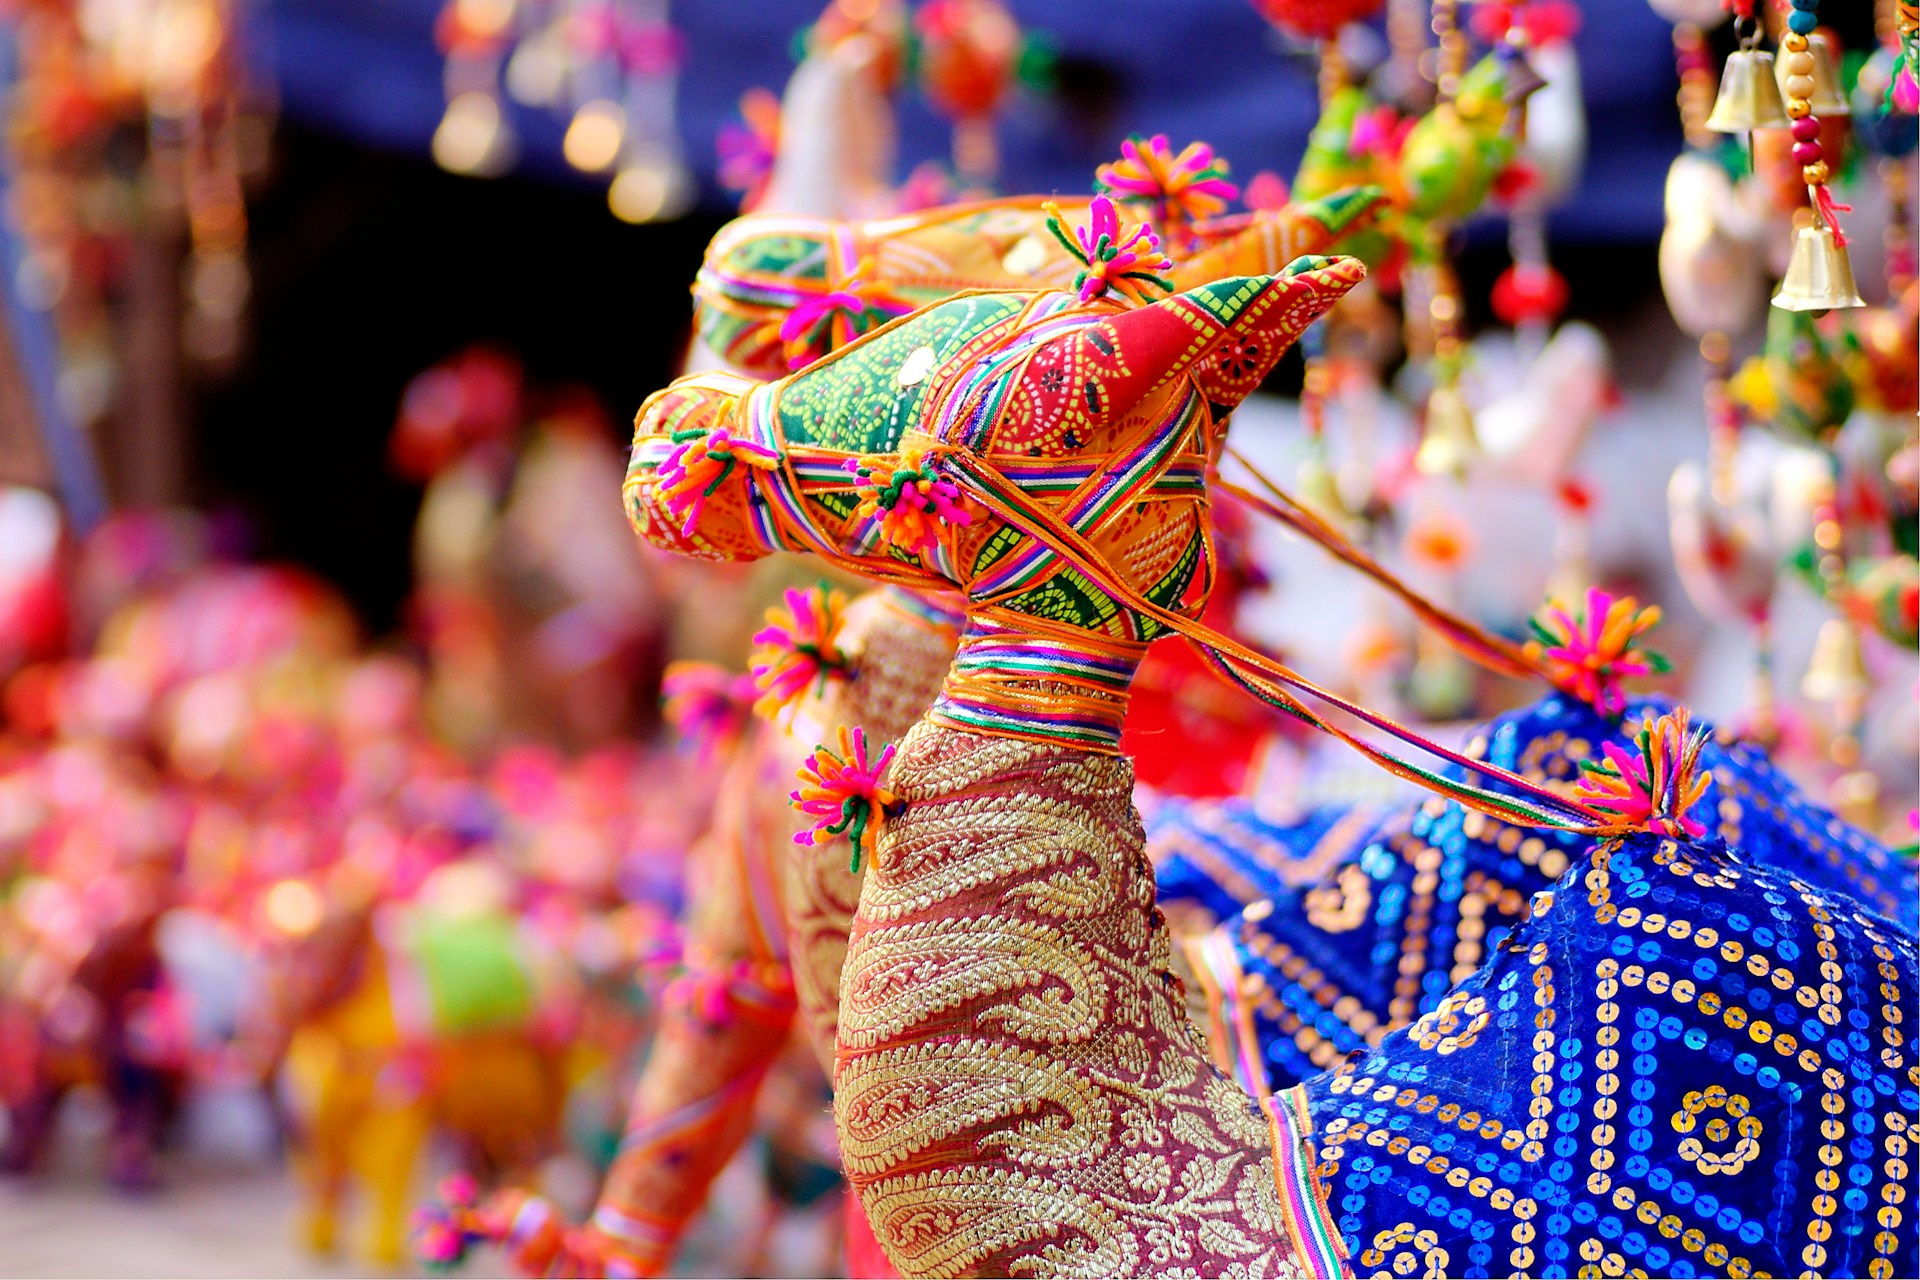 Colorful crafts for sale at Dilli Haat market (photo: Varun Phull).